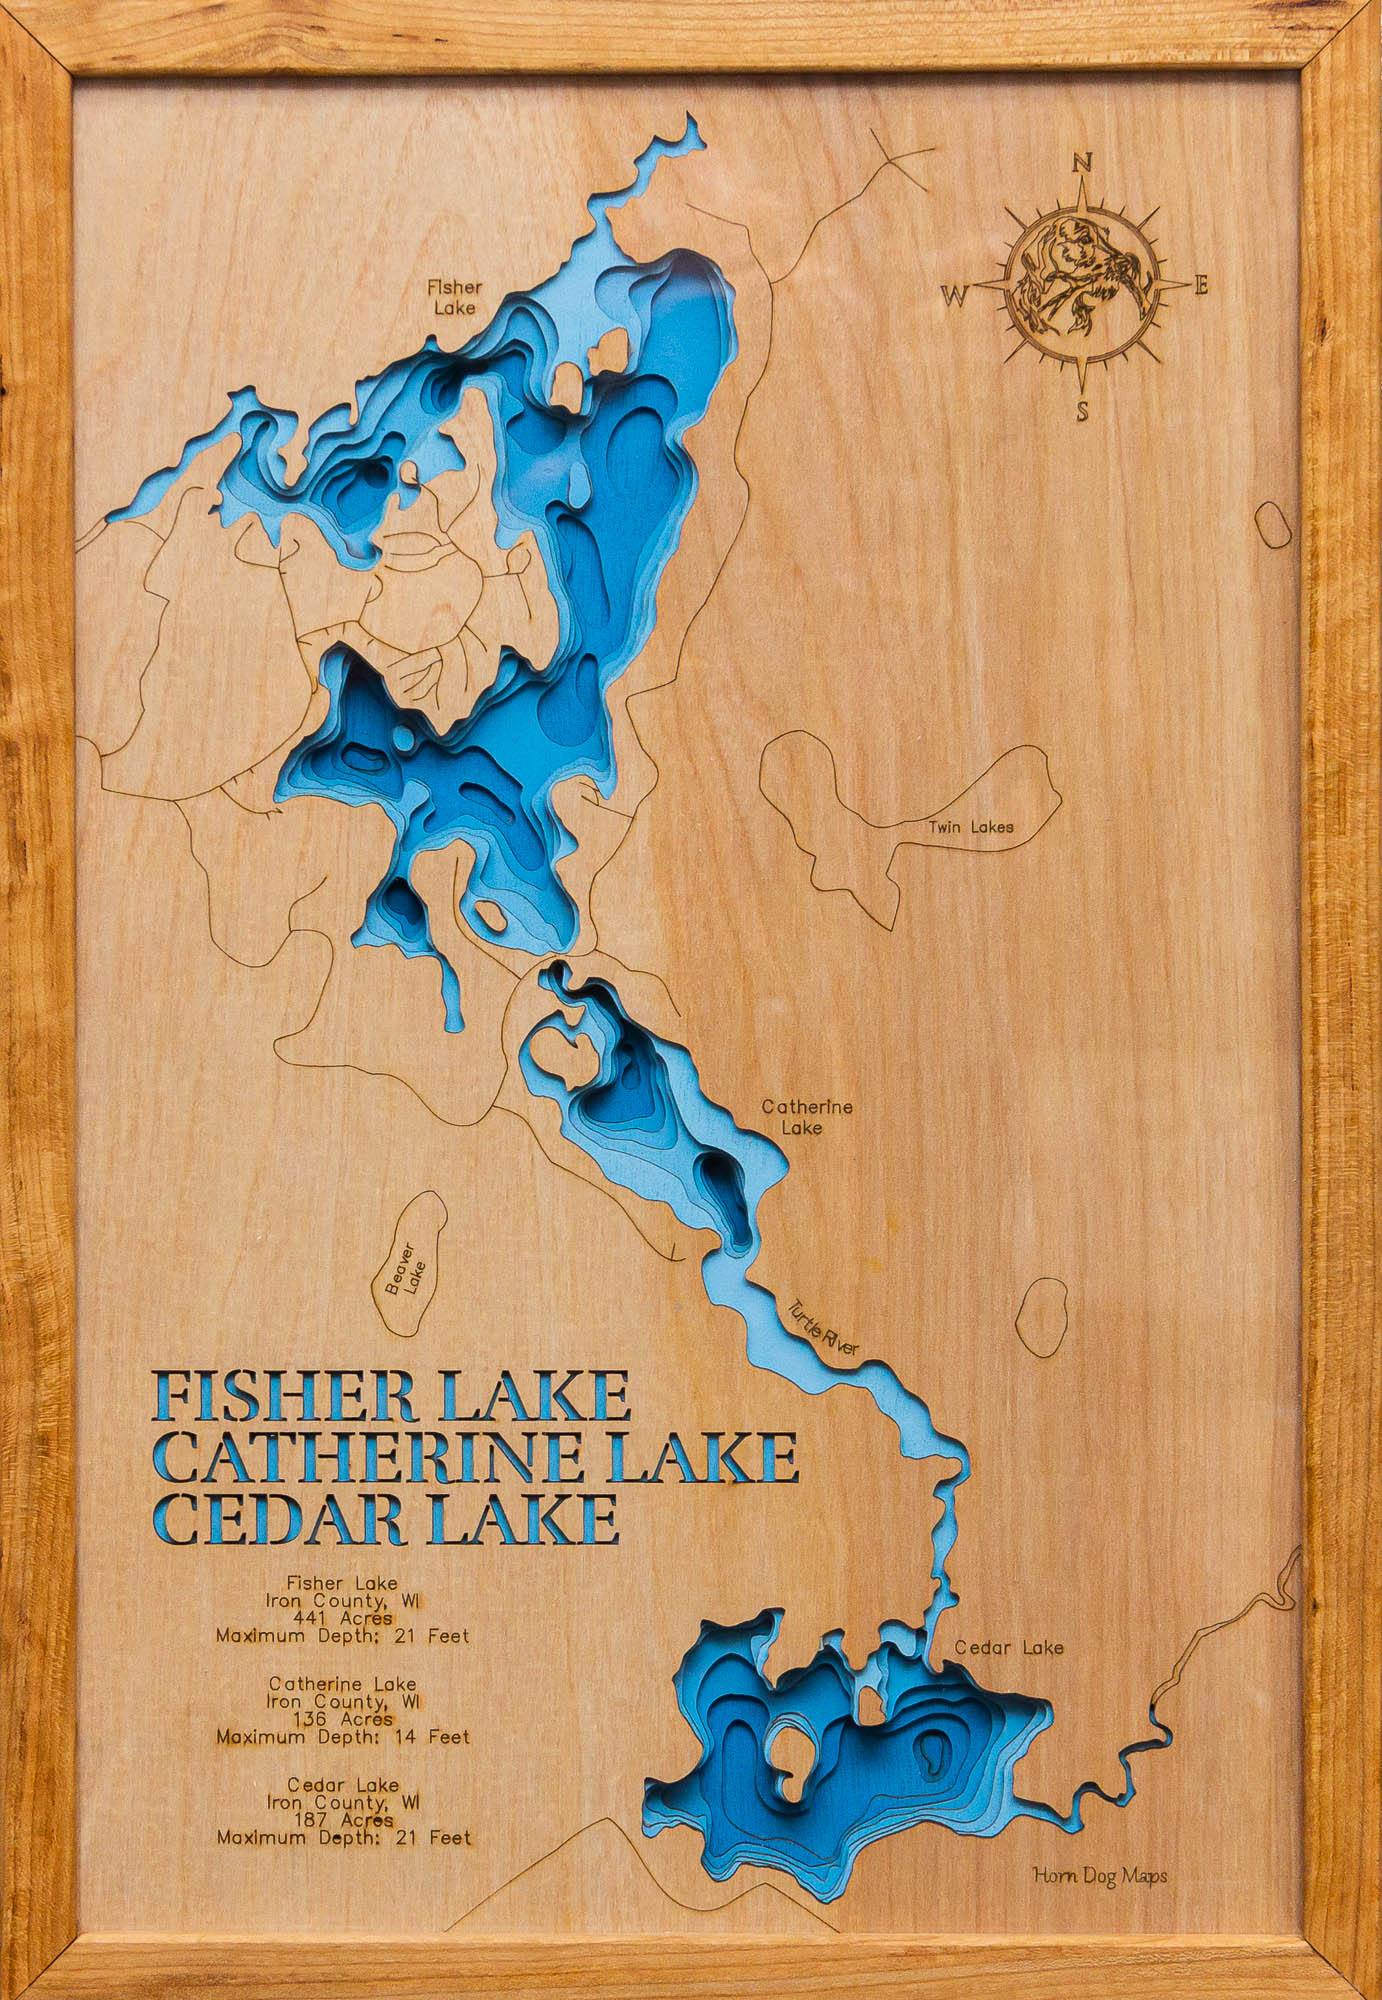 Fisher, Catherine, and Cedar Lakes in Iron County, WI